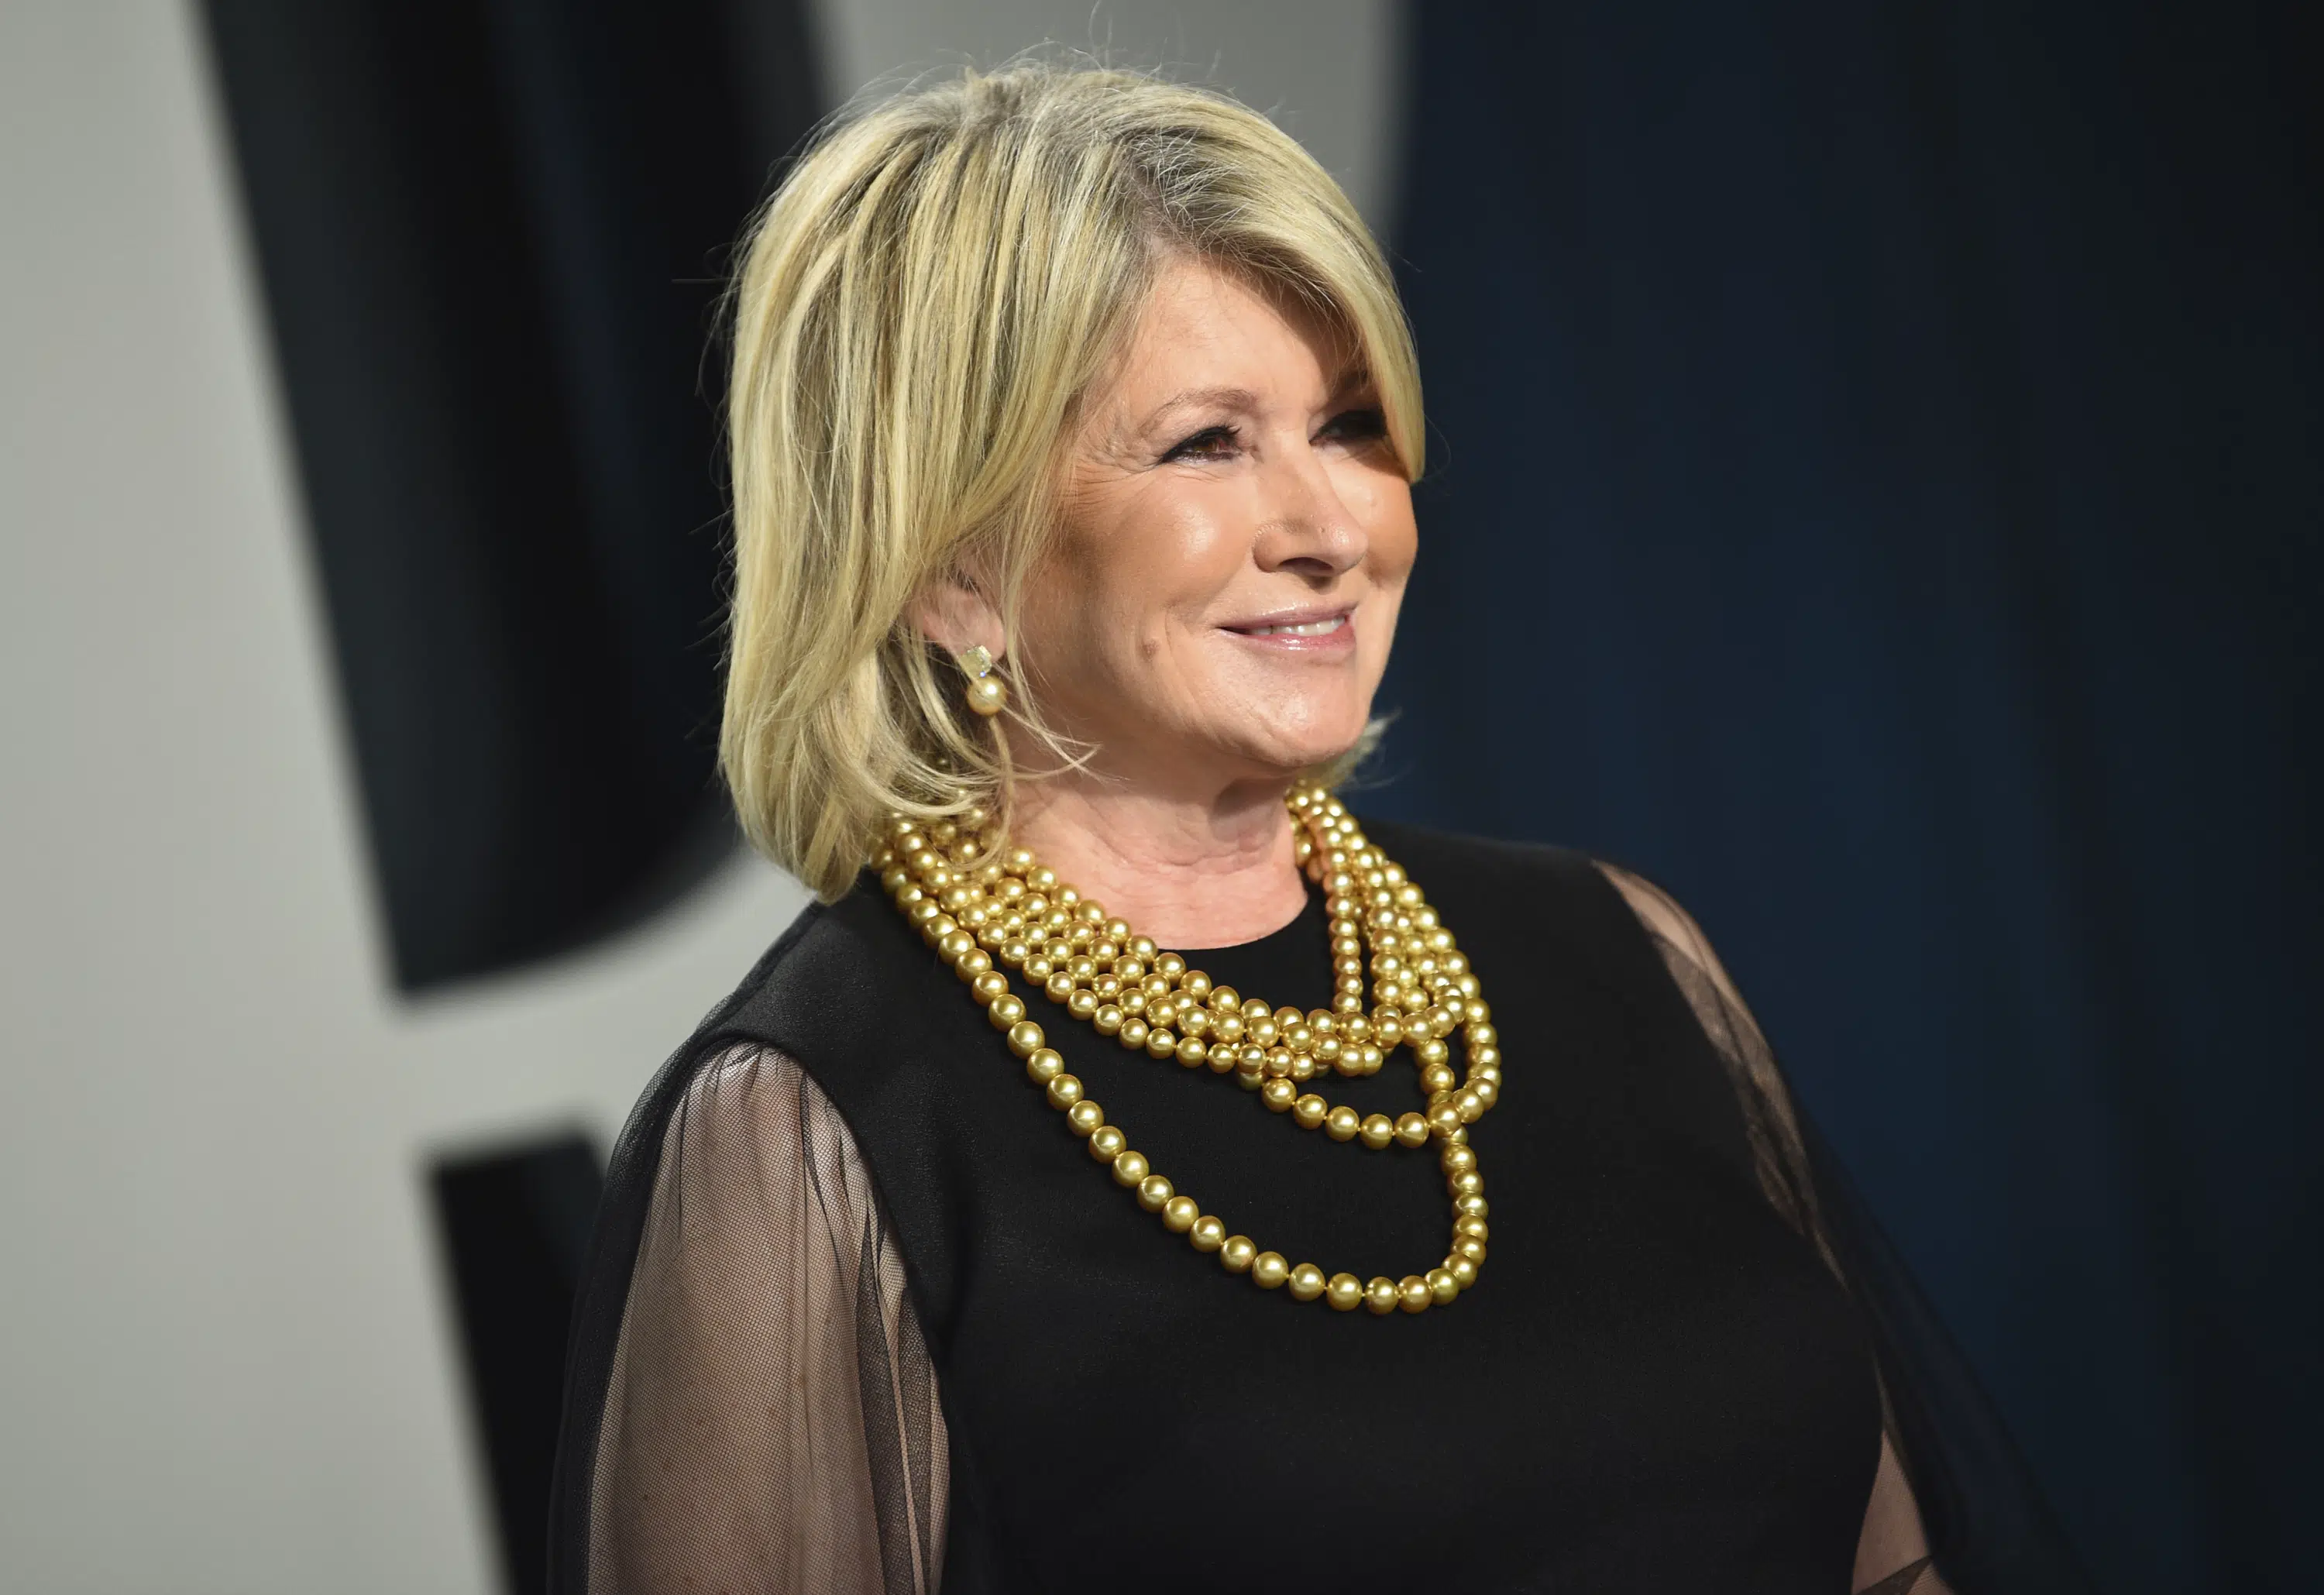 Martha Stewart, 81, becomes the oldest Sports Illustrated swimsuit cover model